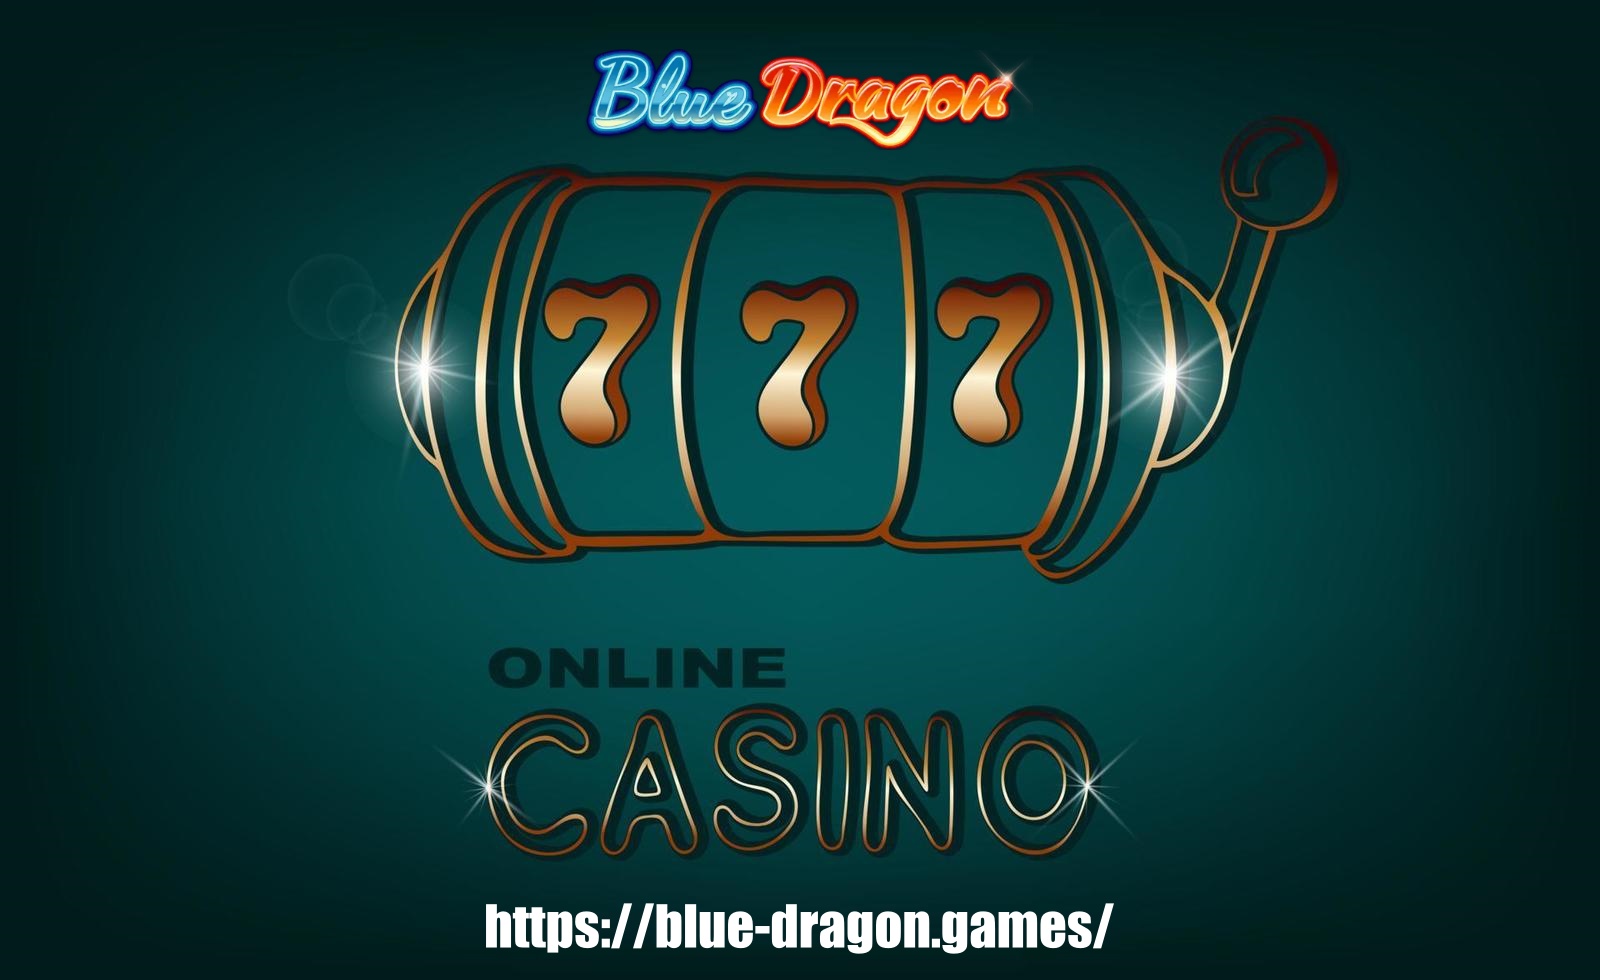 Wings of Fortune: Soar High with Blue Dragon Casino Games